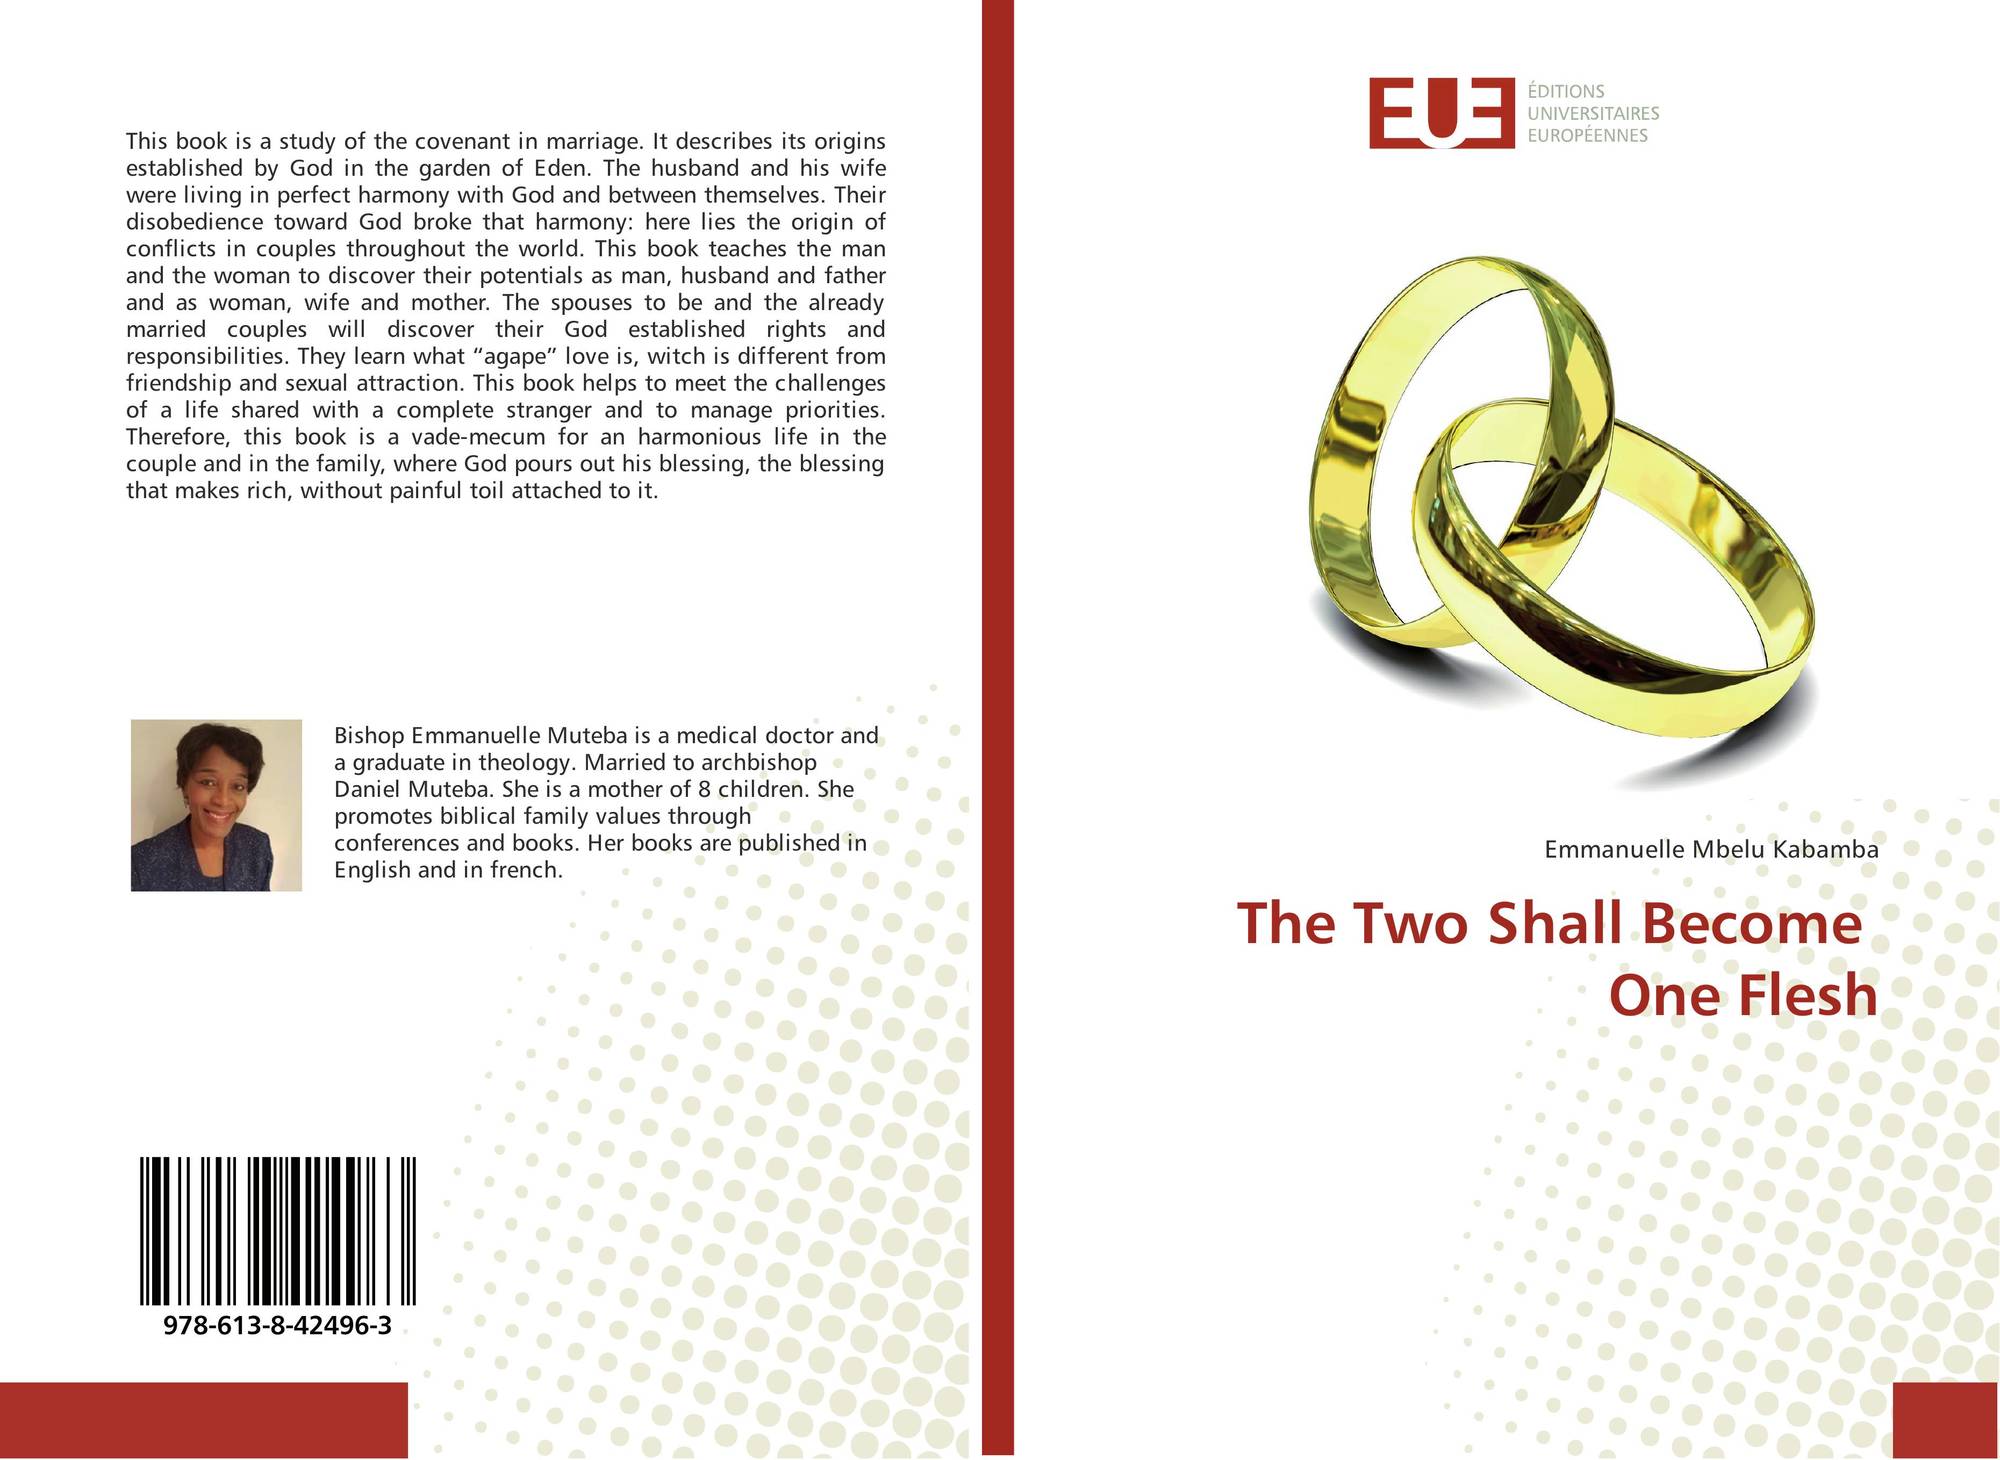 The Two Shall Become One Flesh 978 613 8 3 By Emmanuelle Mbelu Kabamba